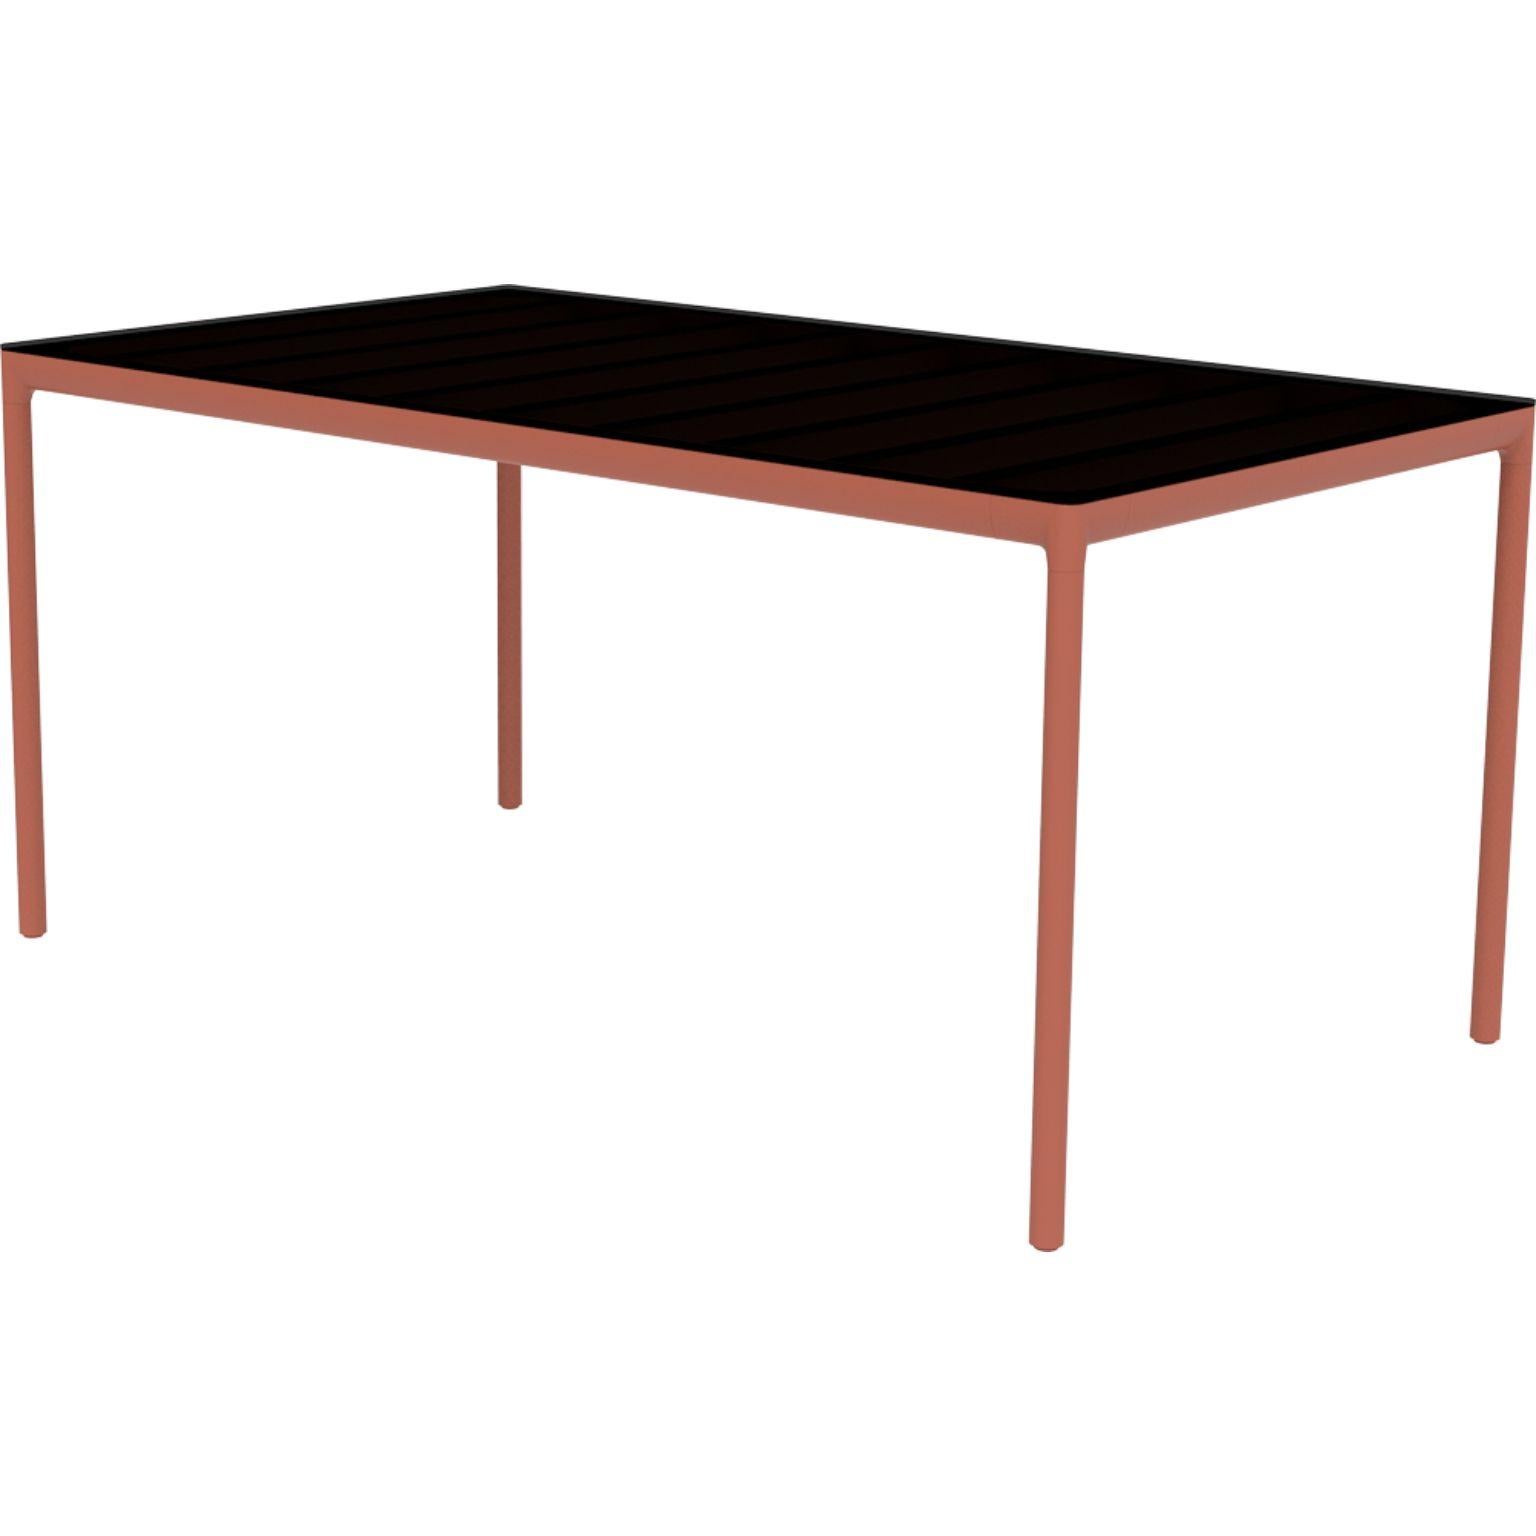 Ribbons Salmon 160 coffee table by MOWEE
Dimensions: D90 x W160 x H75 cm
Material: Aluminum and HPL top.
Weight: 21 kg.
Also available in different colors and finishes. (HPL Black Edge or Neolith top).

An unmistakable collection for its